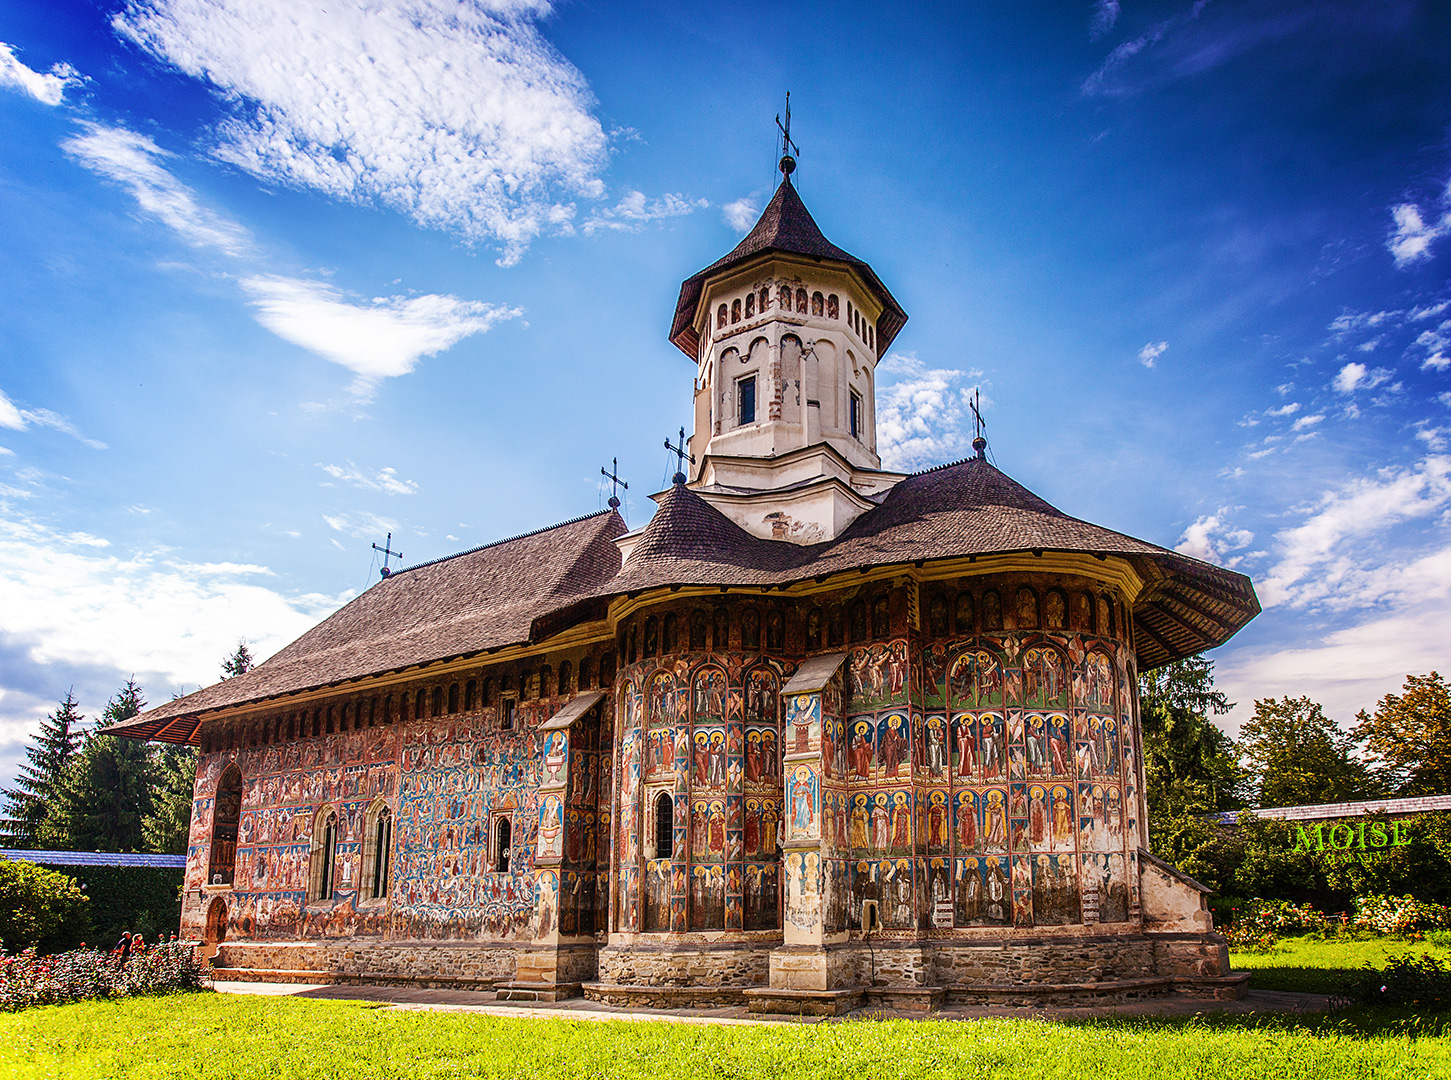 Painted Monastery in Romania | © Alex Moise/WikiCommons